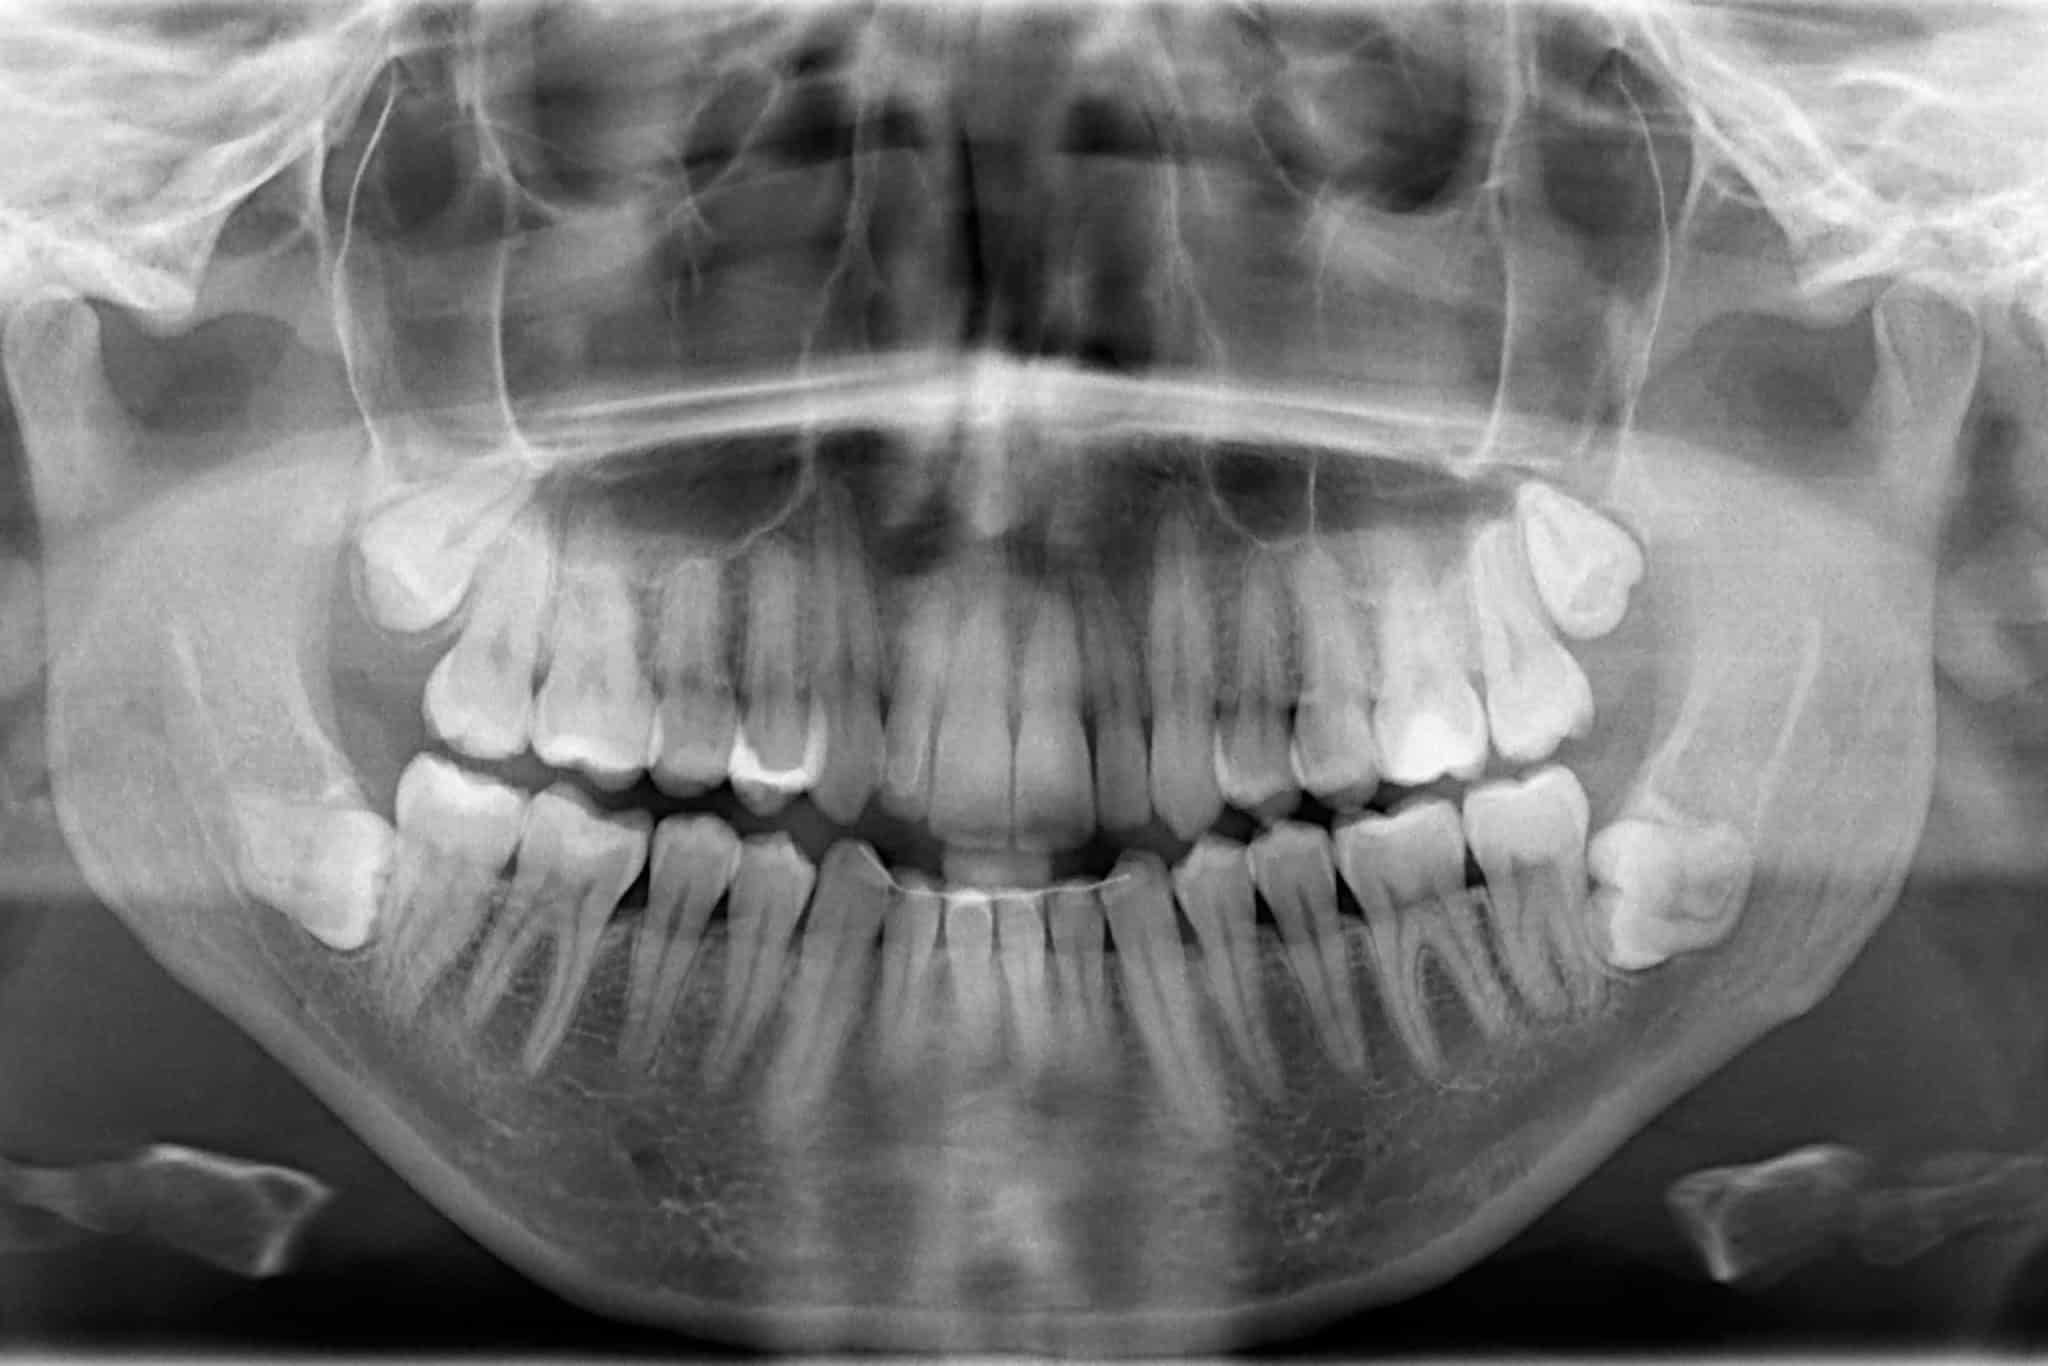 An x-ray of a mouth with wisdom teeth.